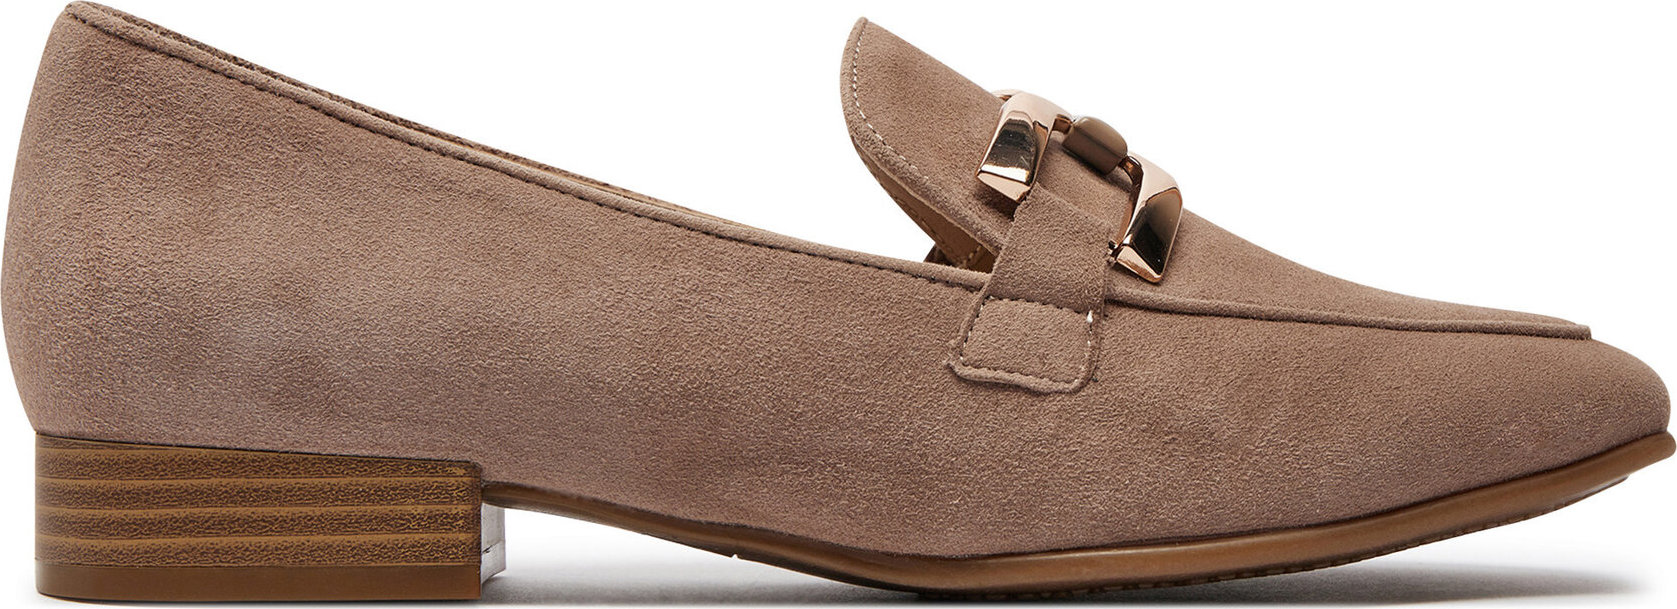 Lordsy Caprice 9-24201-42 Taupe Suede 343